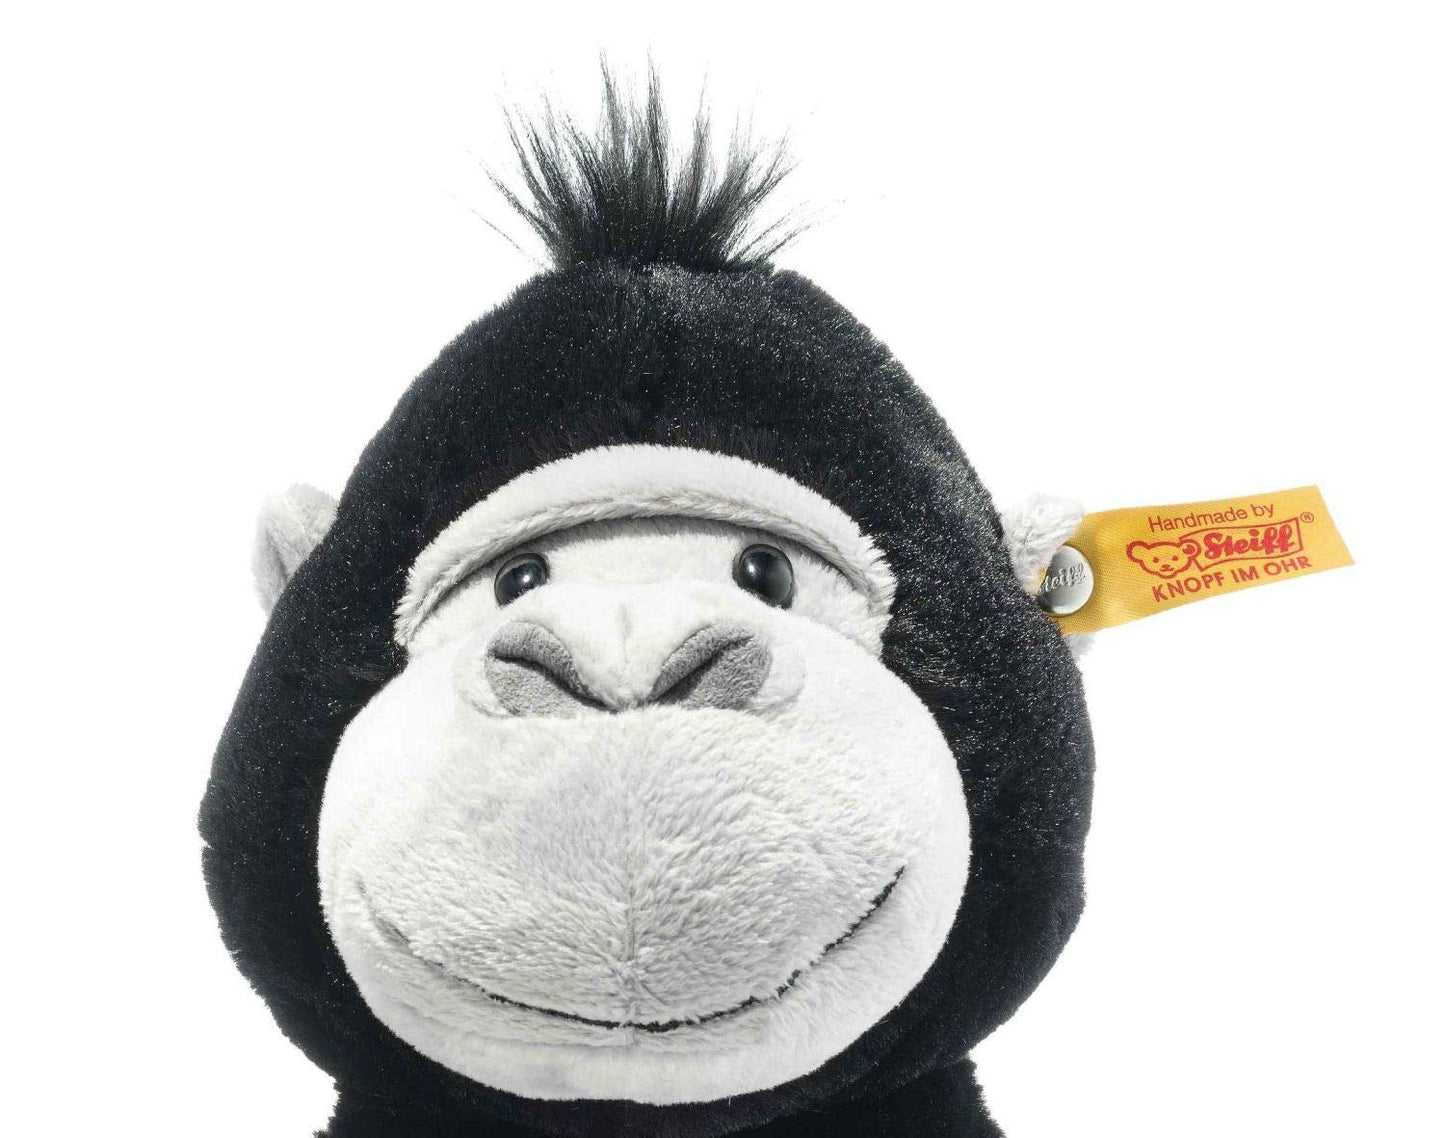 Steiff 069116 Original Soft Toy Bongy Gorilla Soft Cuddly Friends Cuddly Toy Approximately 30 cm Branded Plush with Button in the Ear Cuddly Friend for Babies from Birth Black/Light Grey